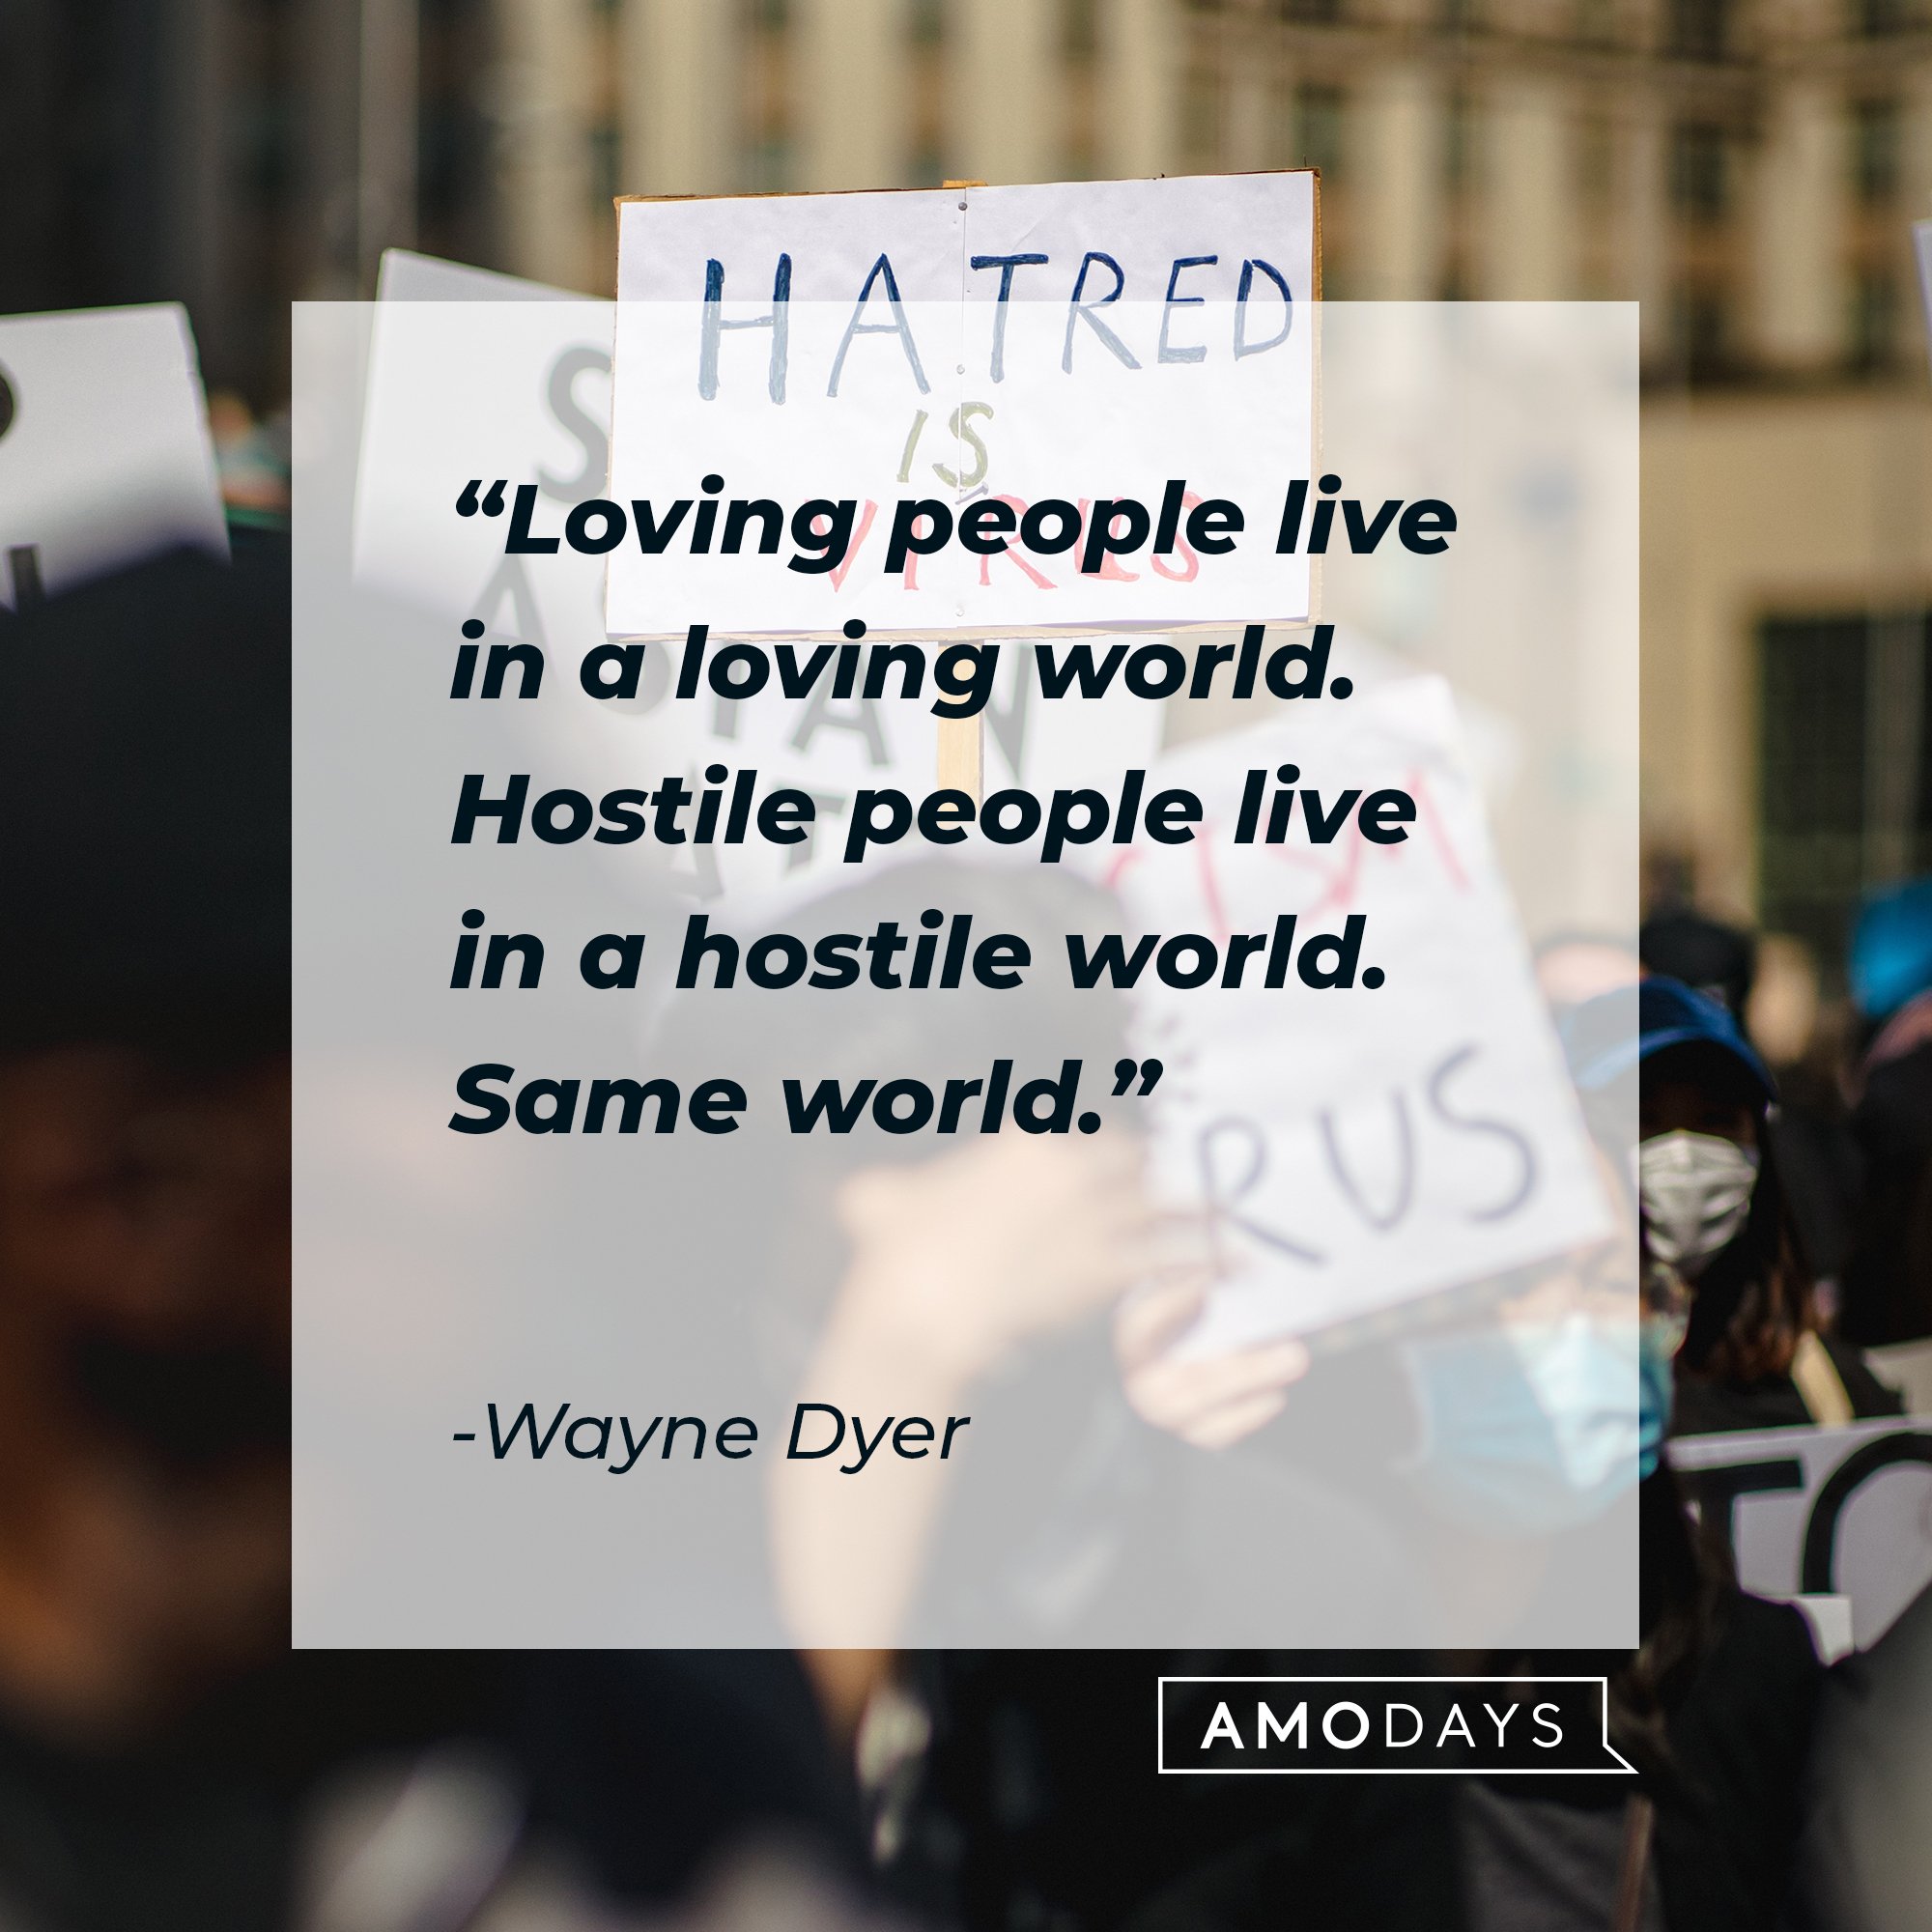 Wayne Dyer’s quote: "Loving people live in a loving world. Hostile people live in a hostile world. Same world." 